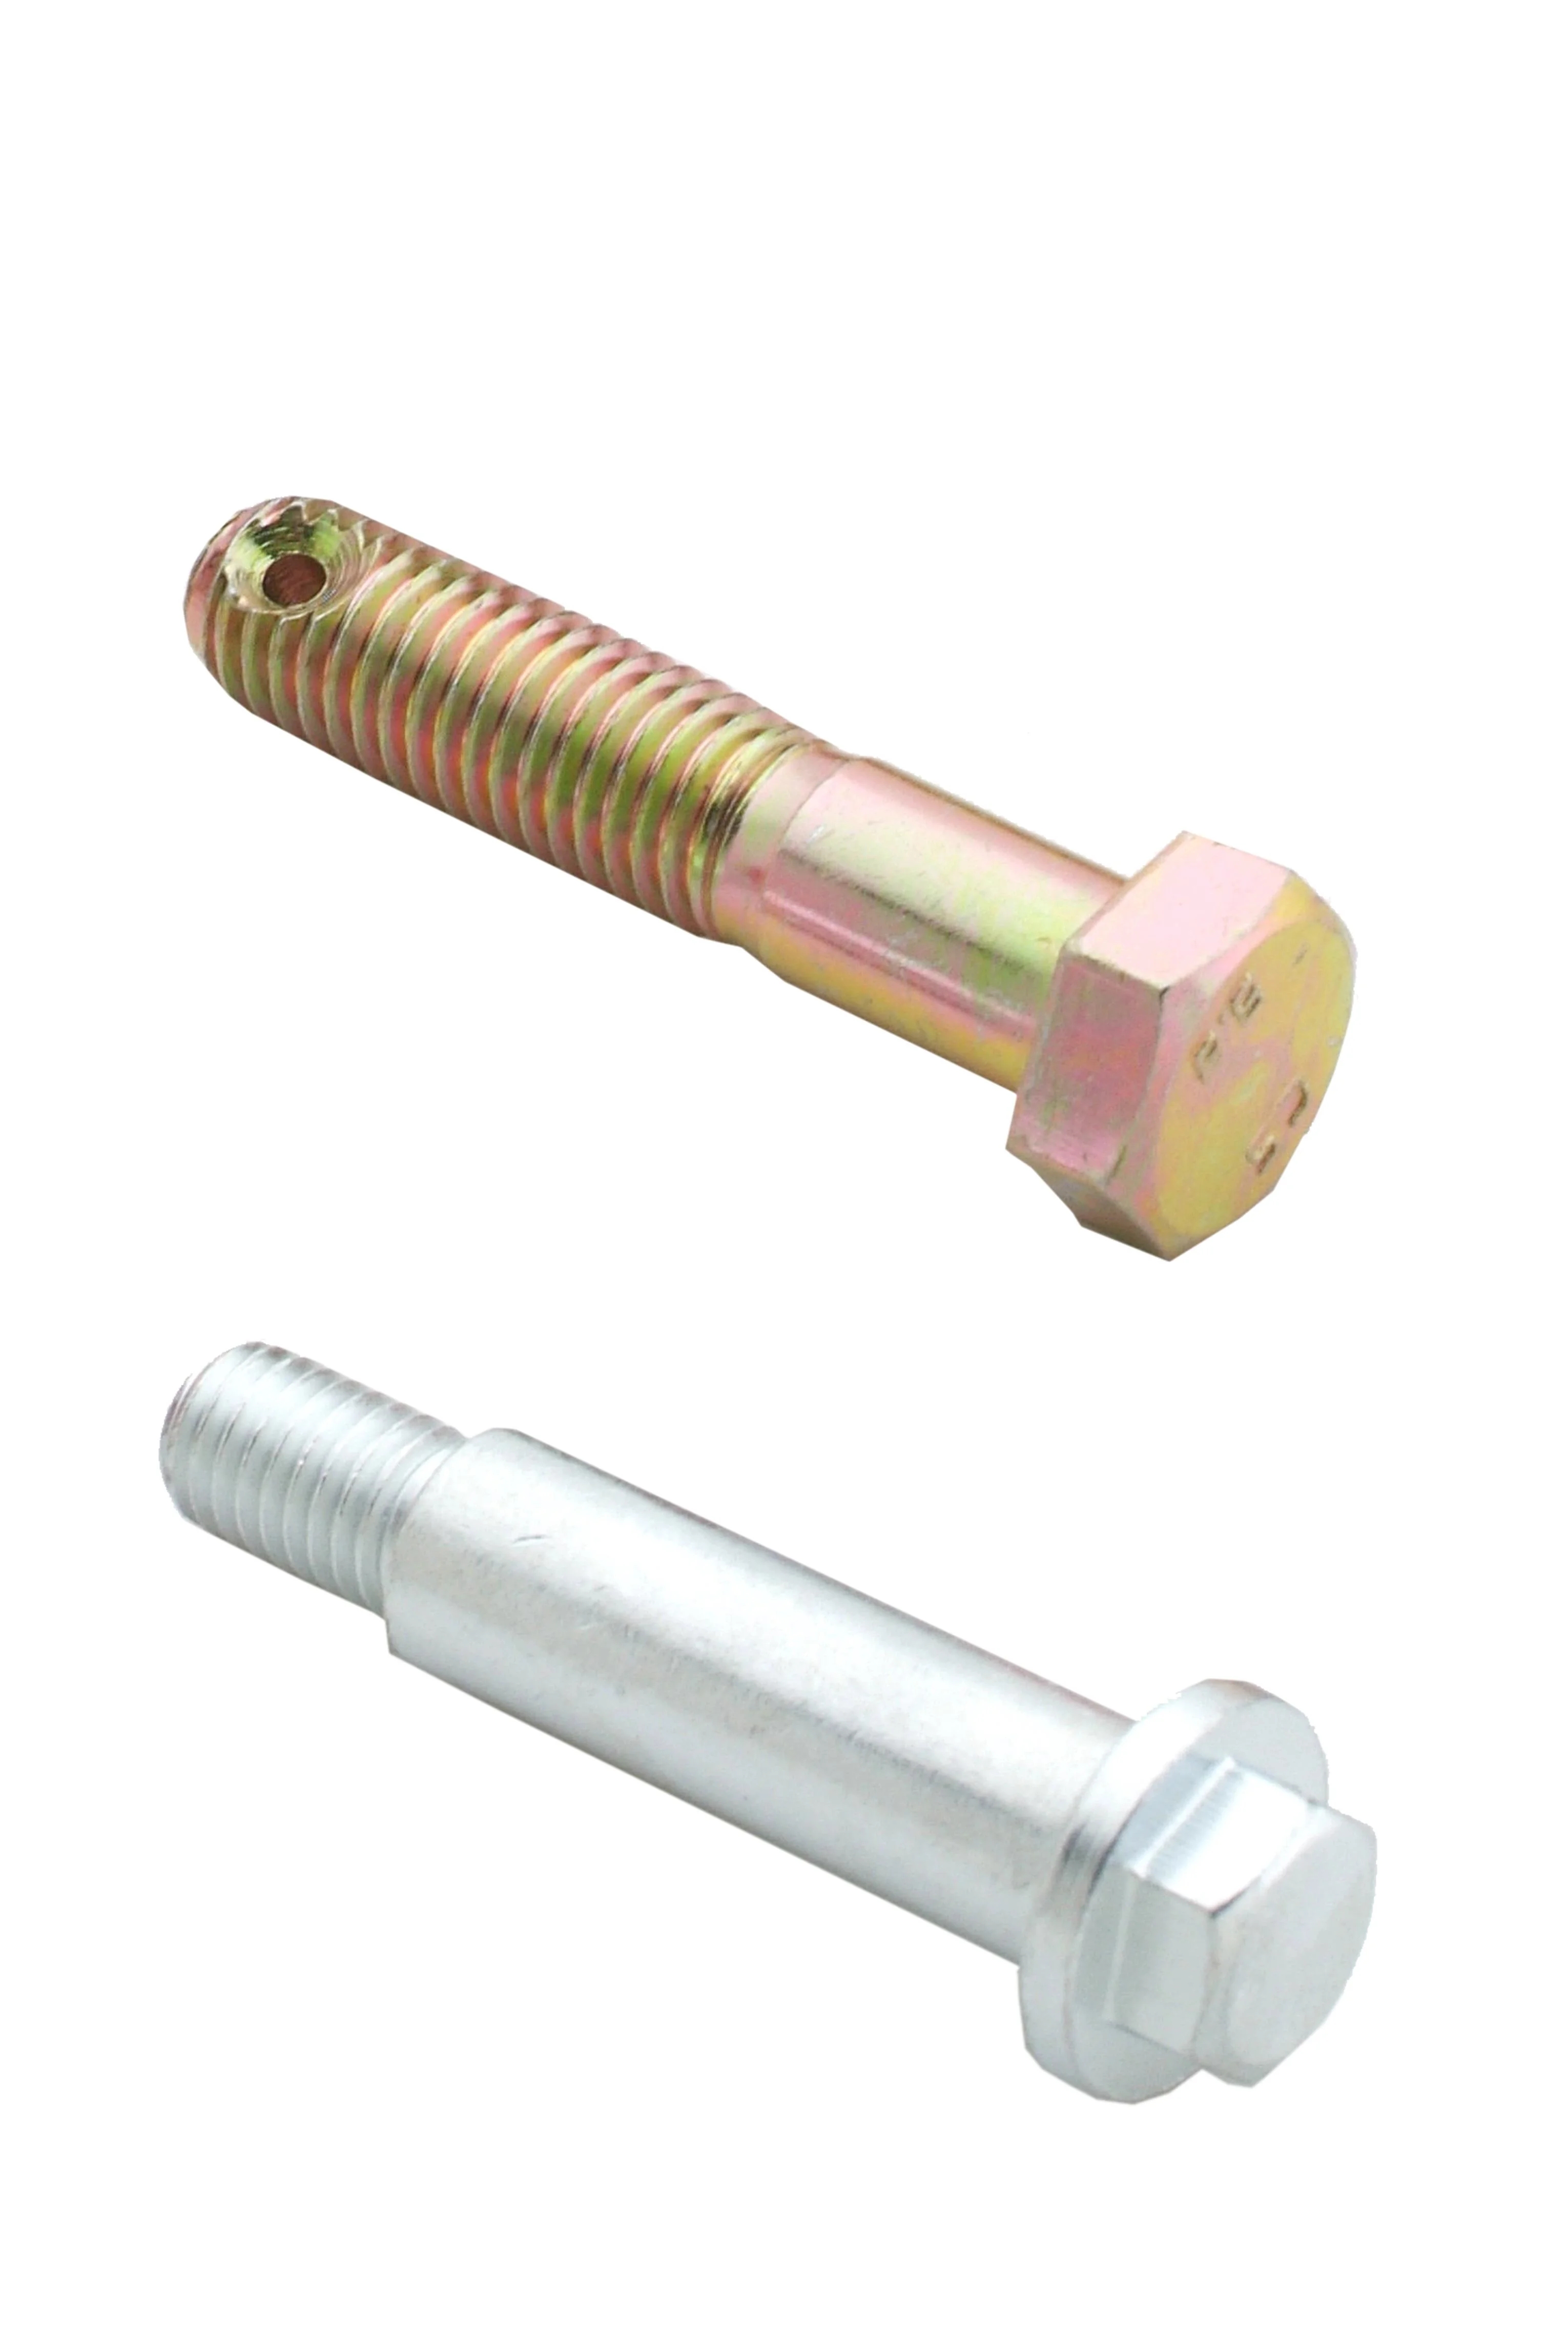 Universal-Standard-Hex-Bolt-and-nut.Web (3)